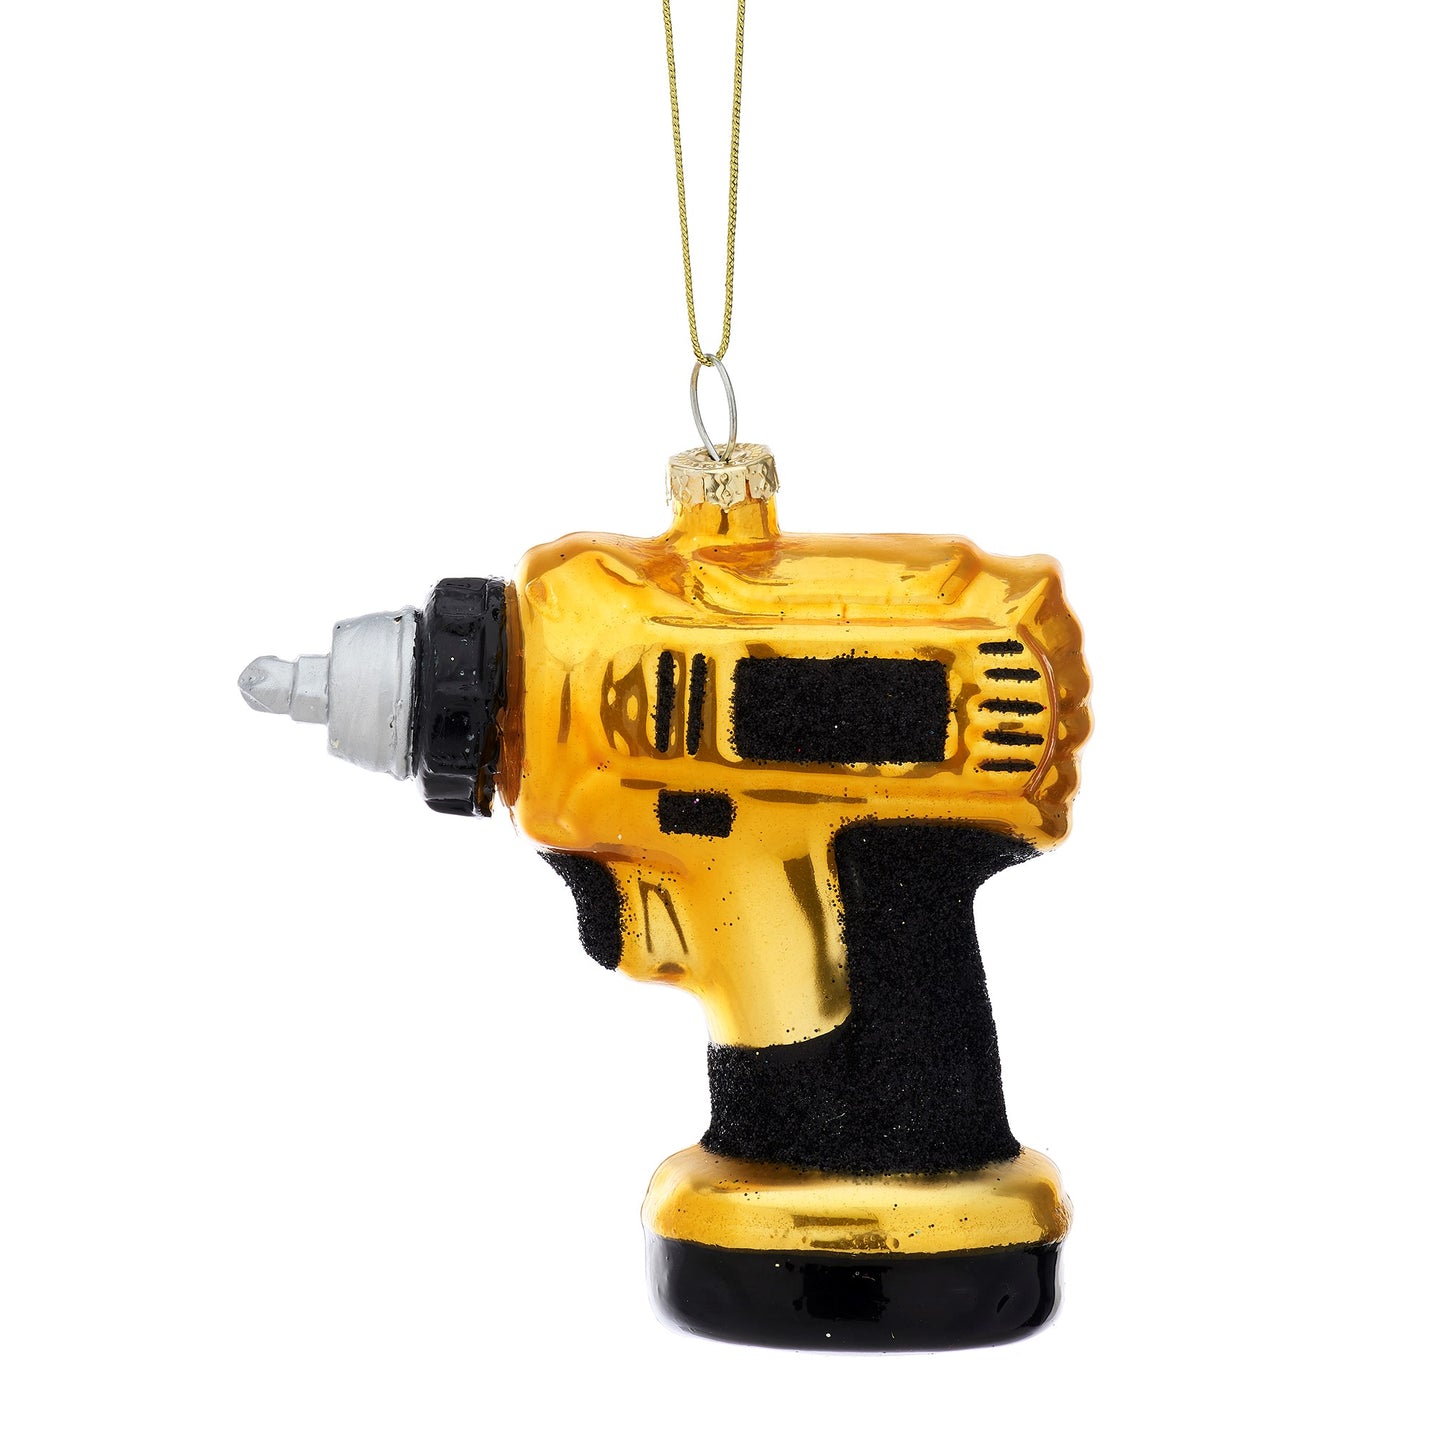 A black and gold drill (yes, you read that right!) Christmas decoration.